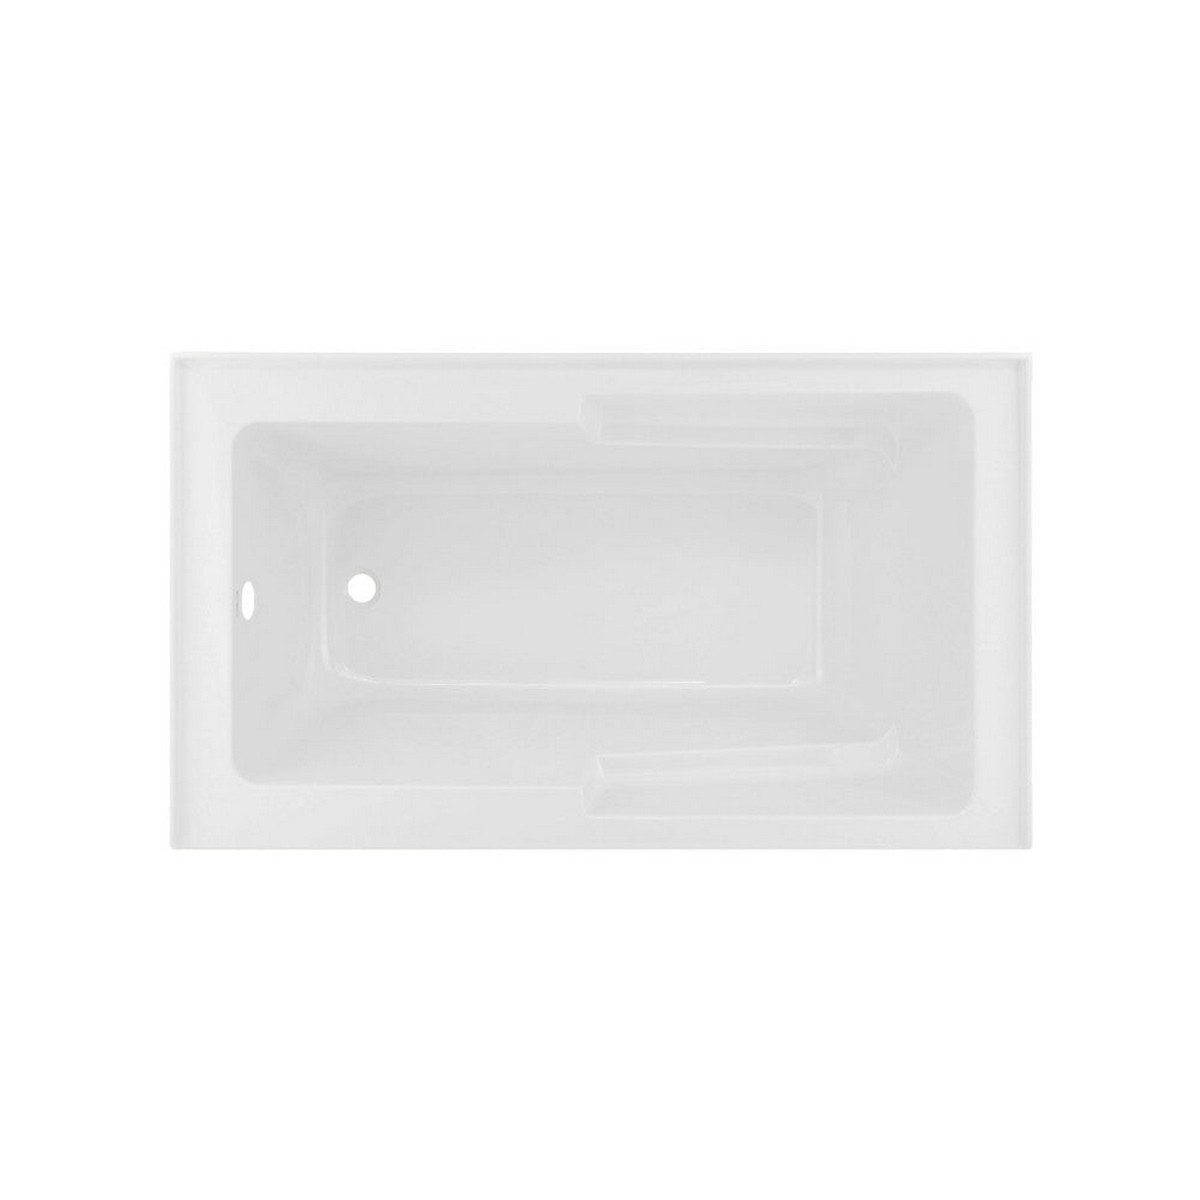 SWISS MADISON SM-AB5 VOLTAIRE 48 INCH RECTANGULAR ALCOVE SOAKING BATHTUB WITH APRON AND DRAIN